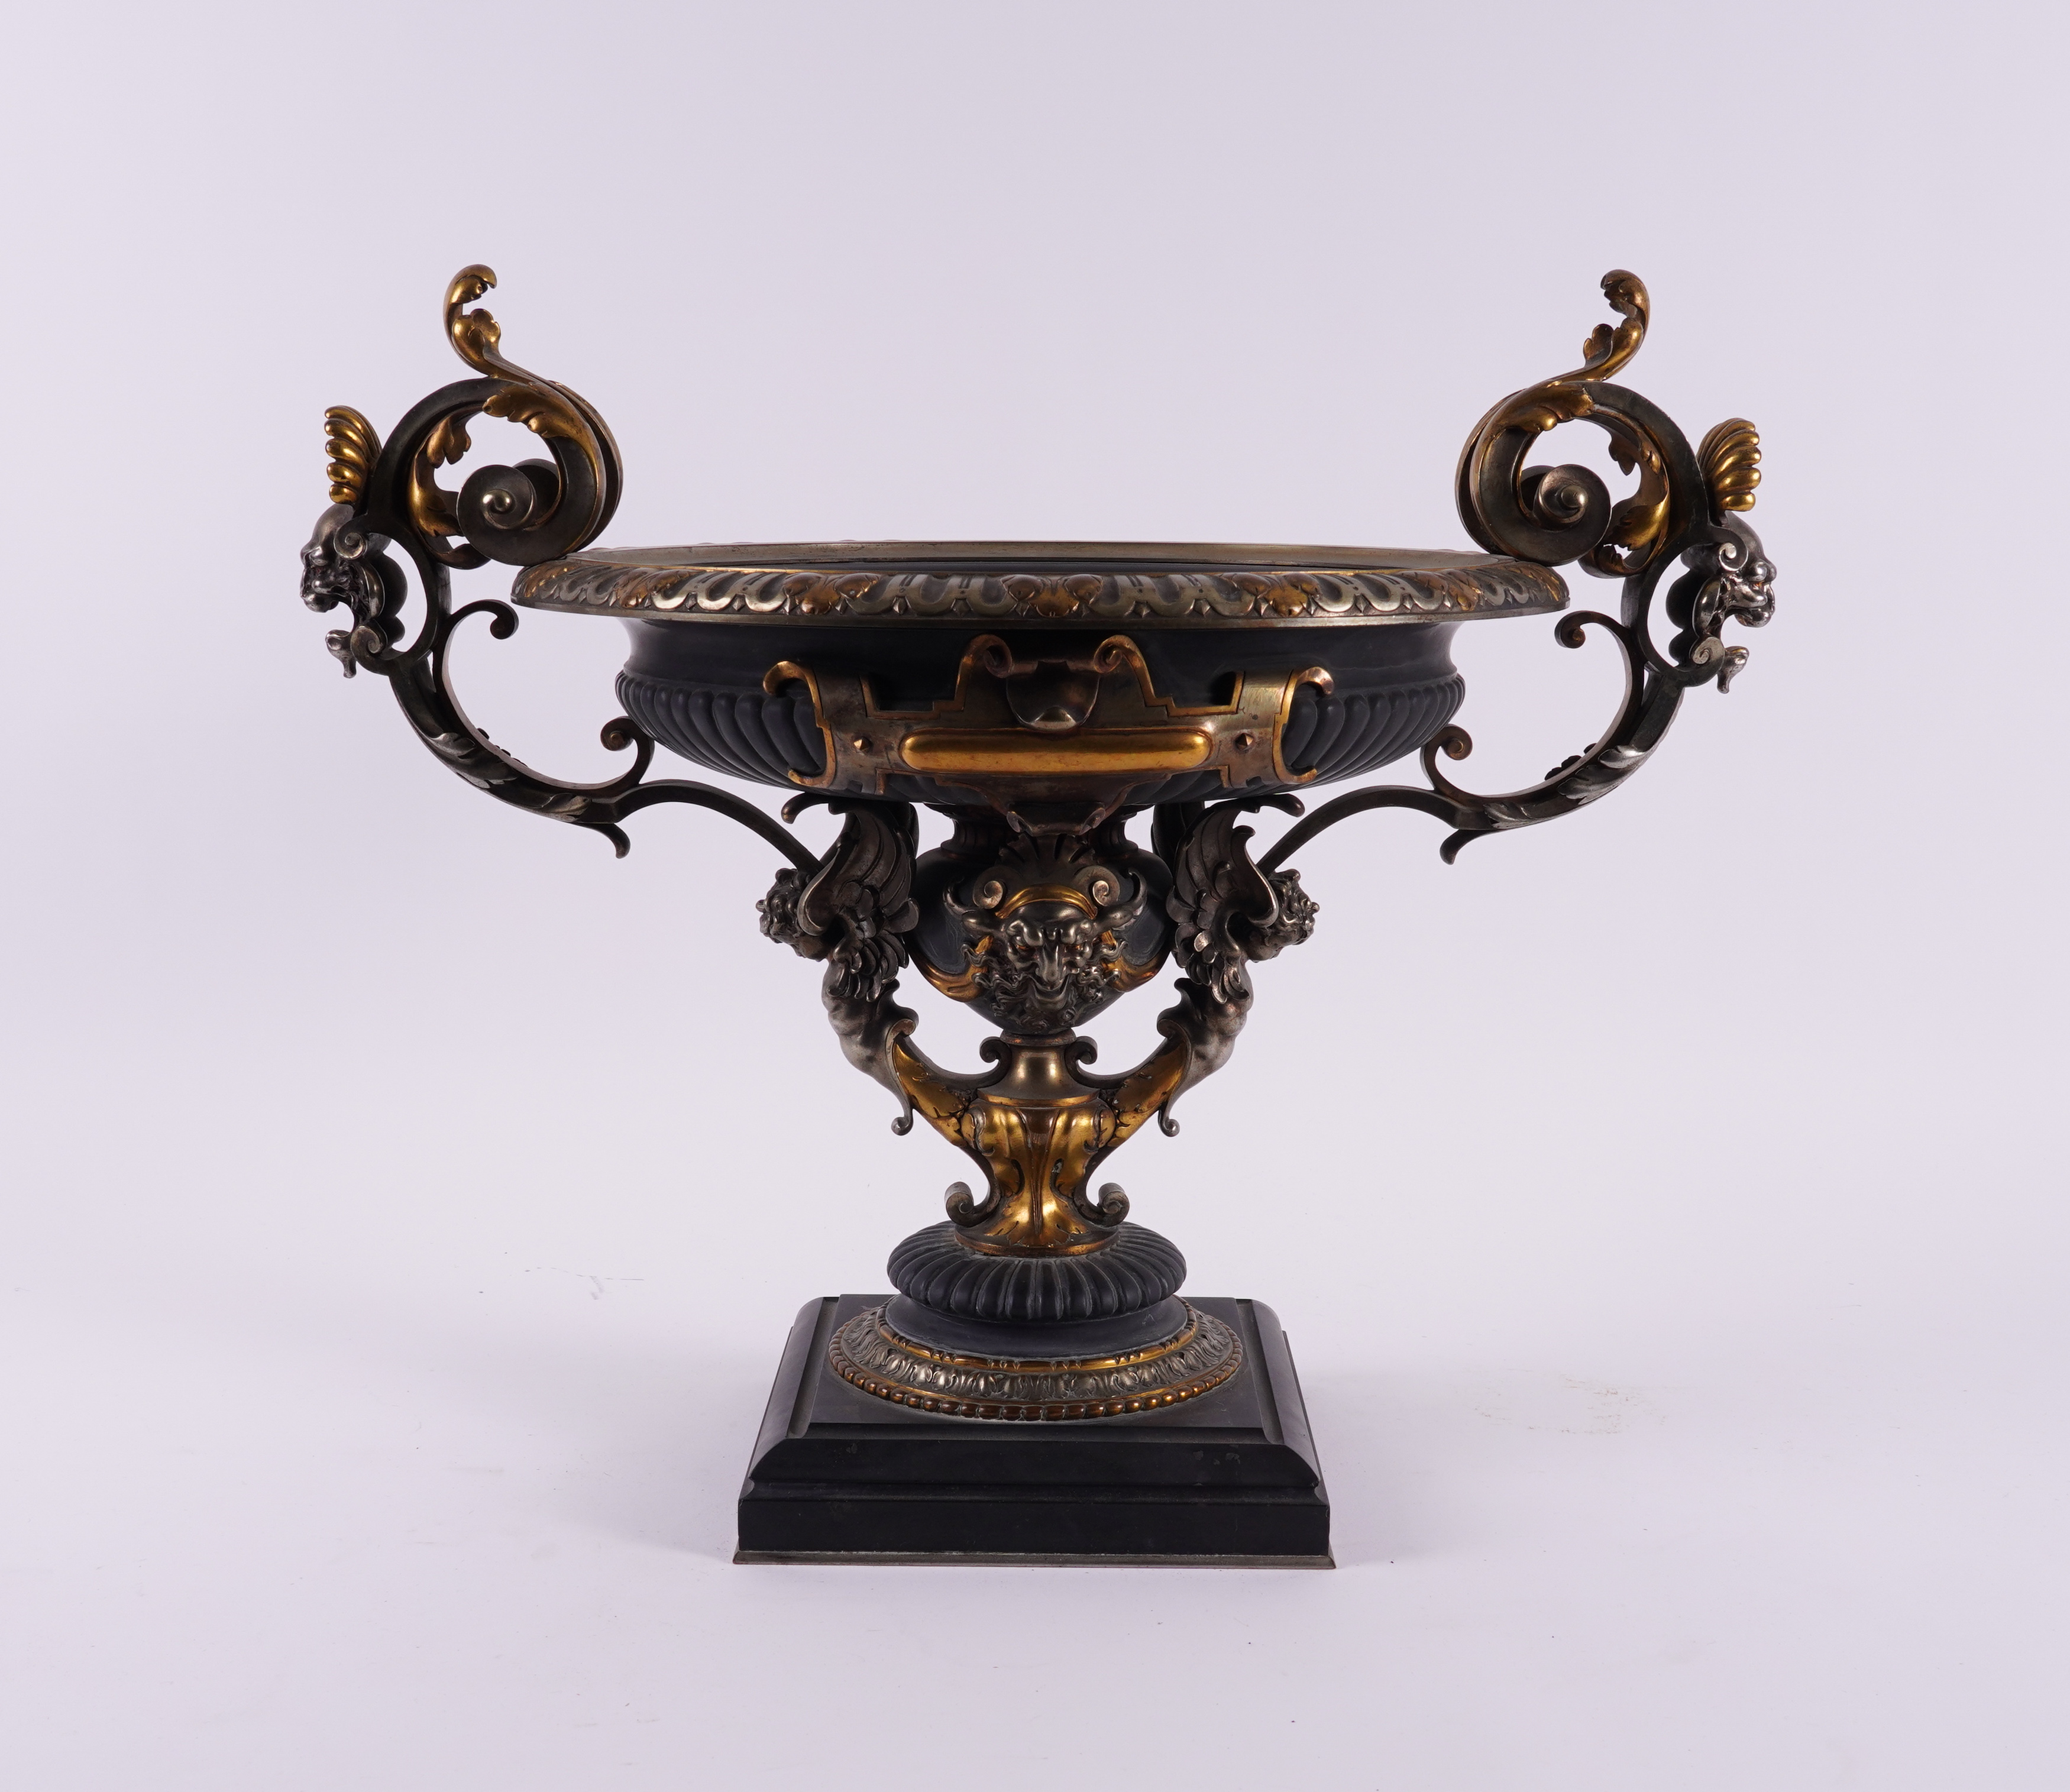 FERDINAND BARBEDIENNE, PARIS: A FRENCH GILT AND SILVERED BRONZE TWIN HANDLED TAZZA - Image 3 of 8